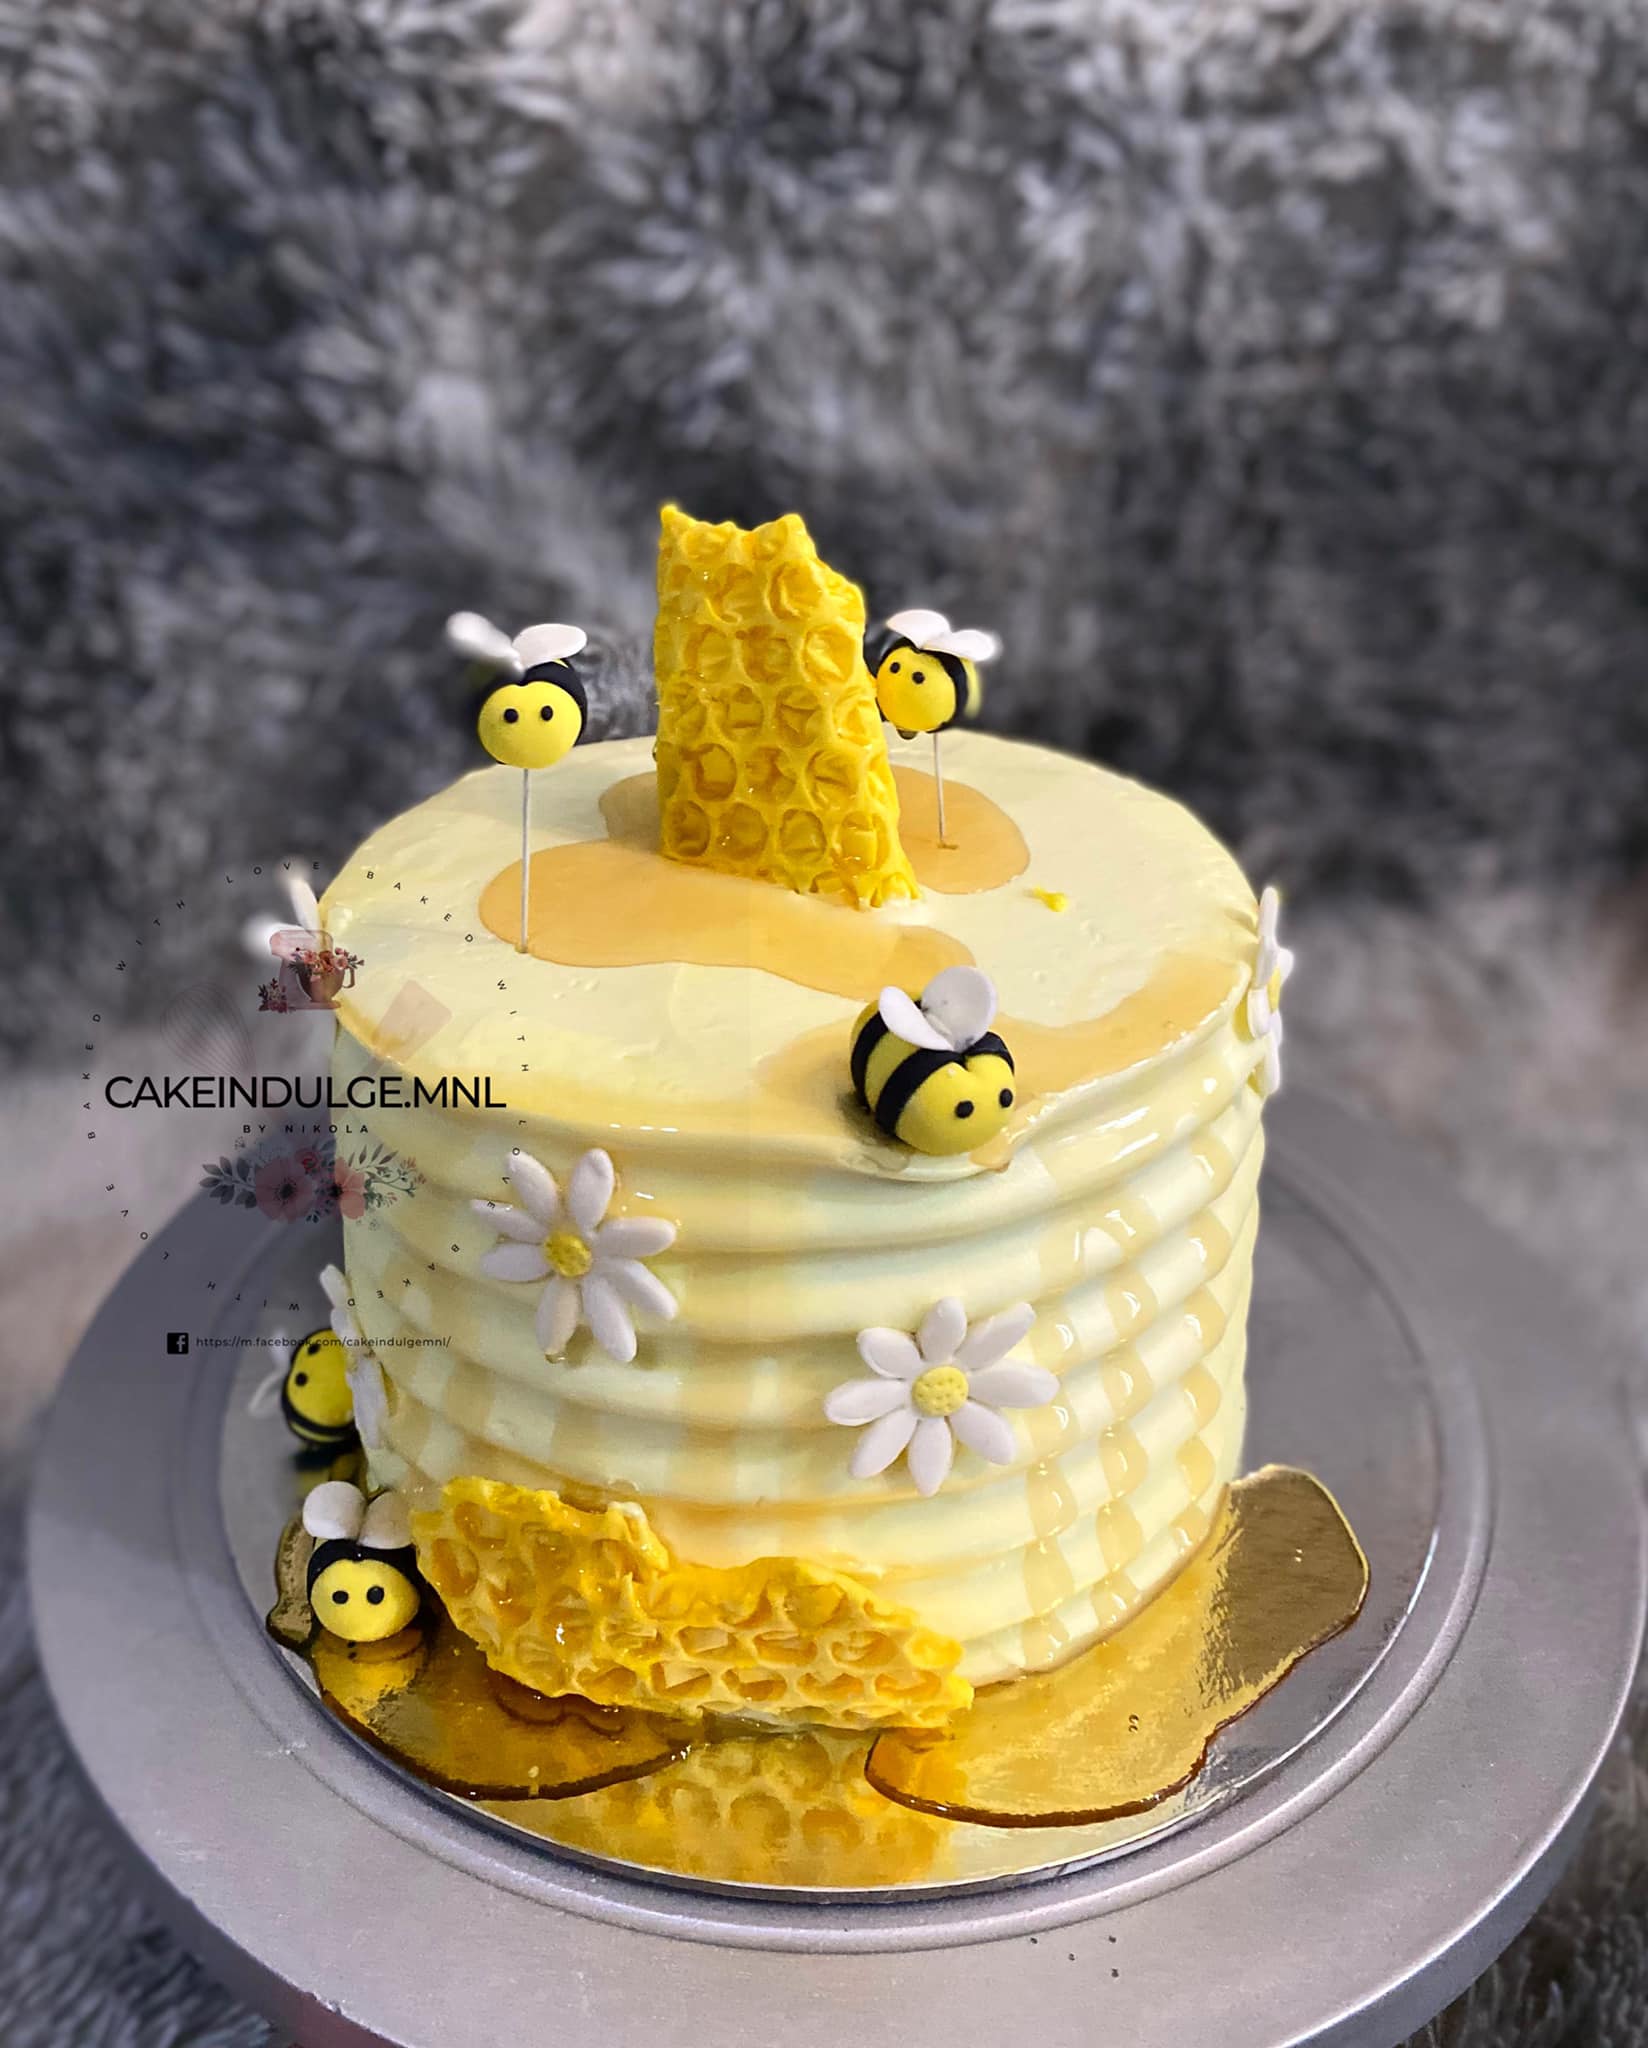 Discover more than 163 cake bee avinashi road - in.eteachers